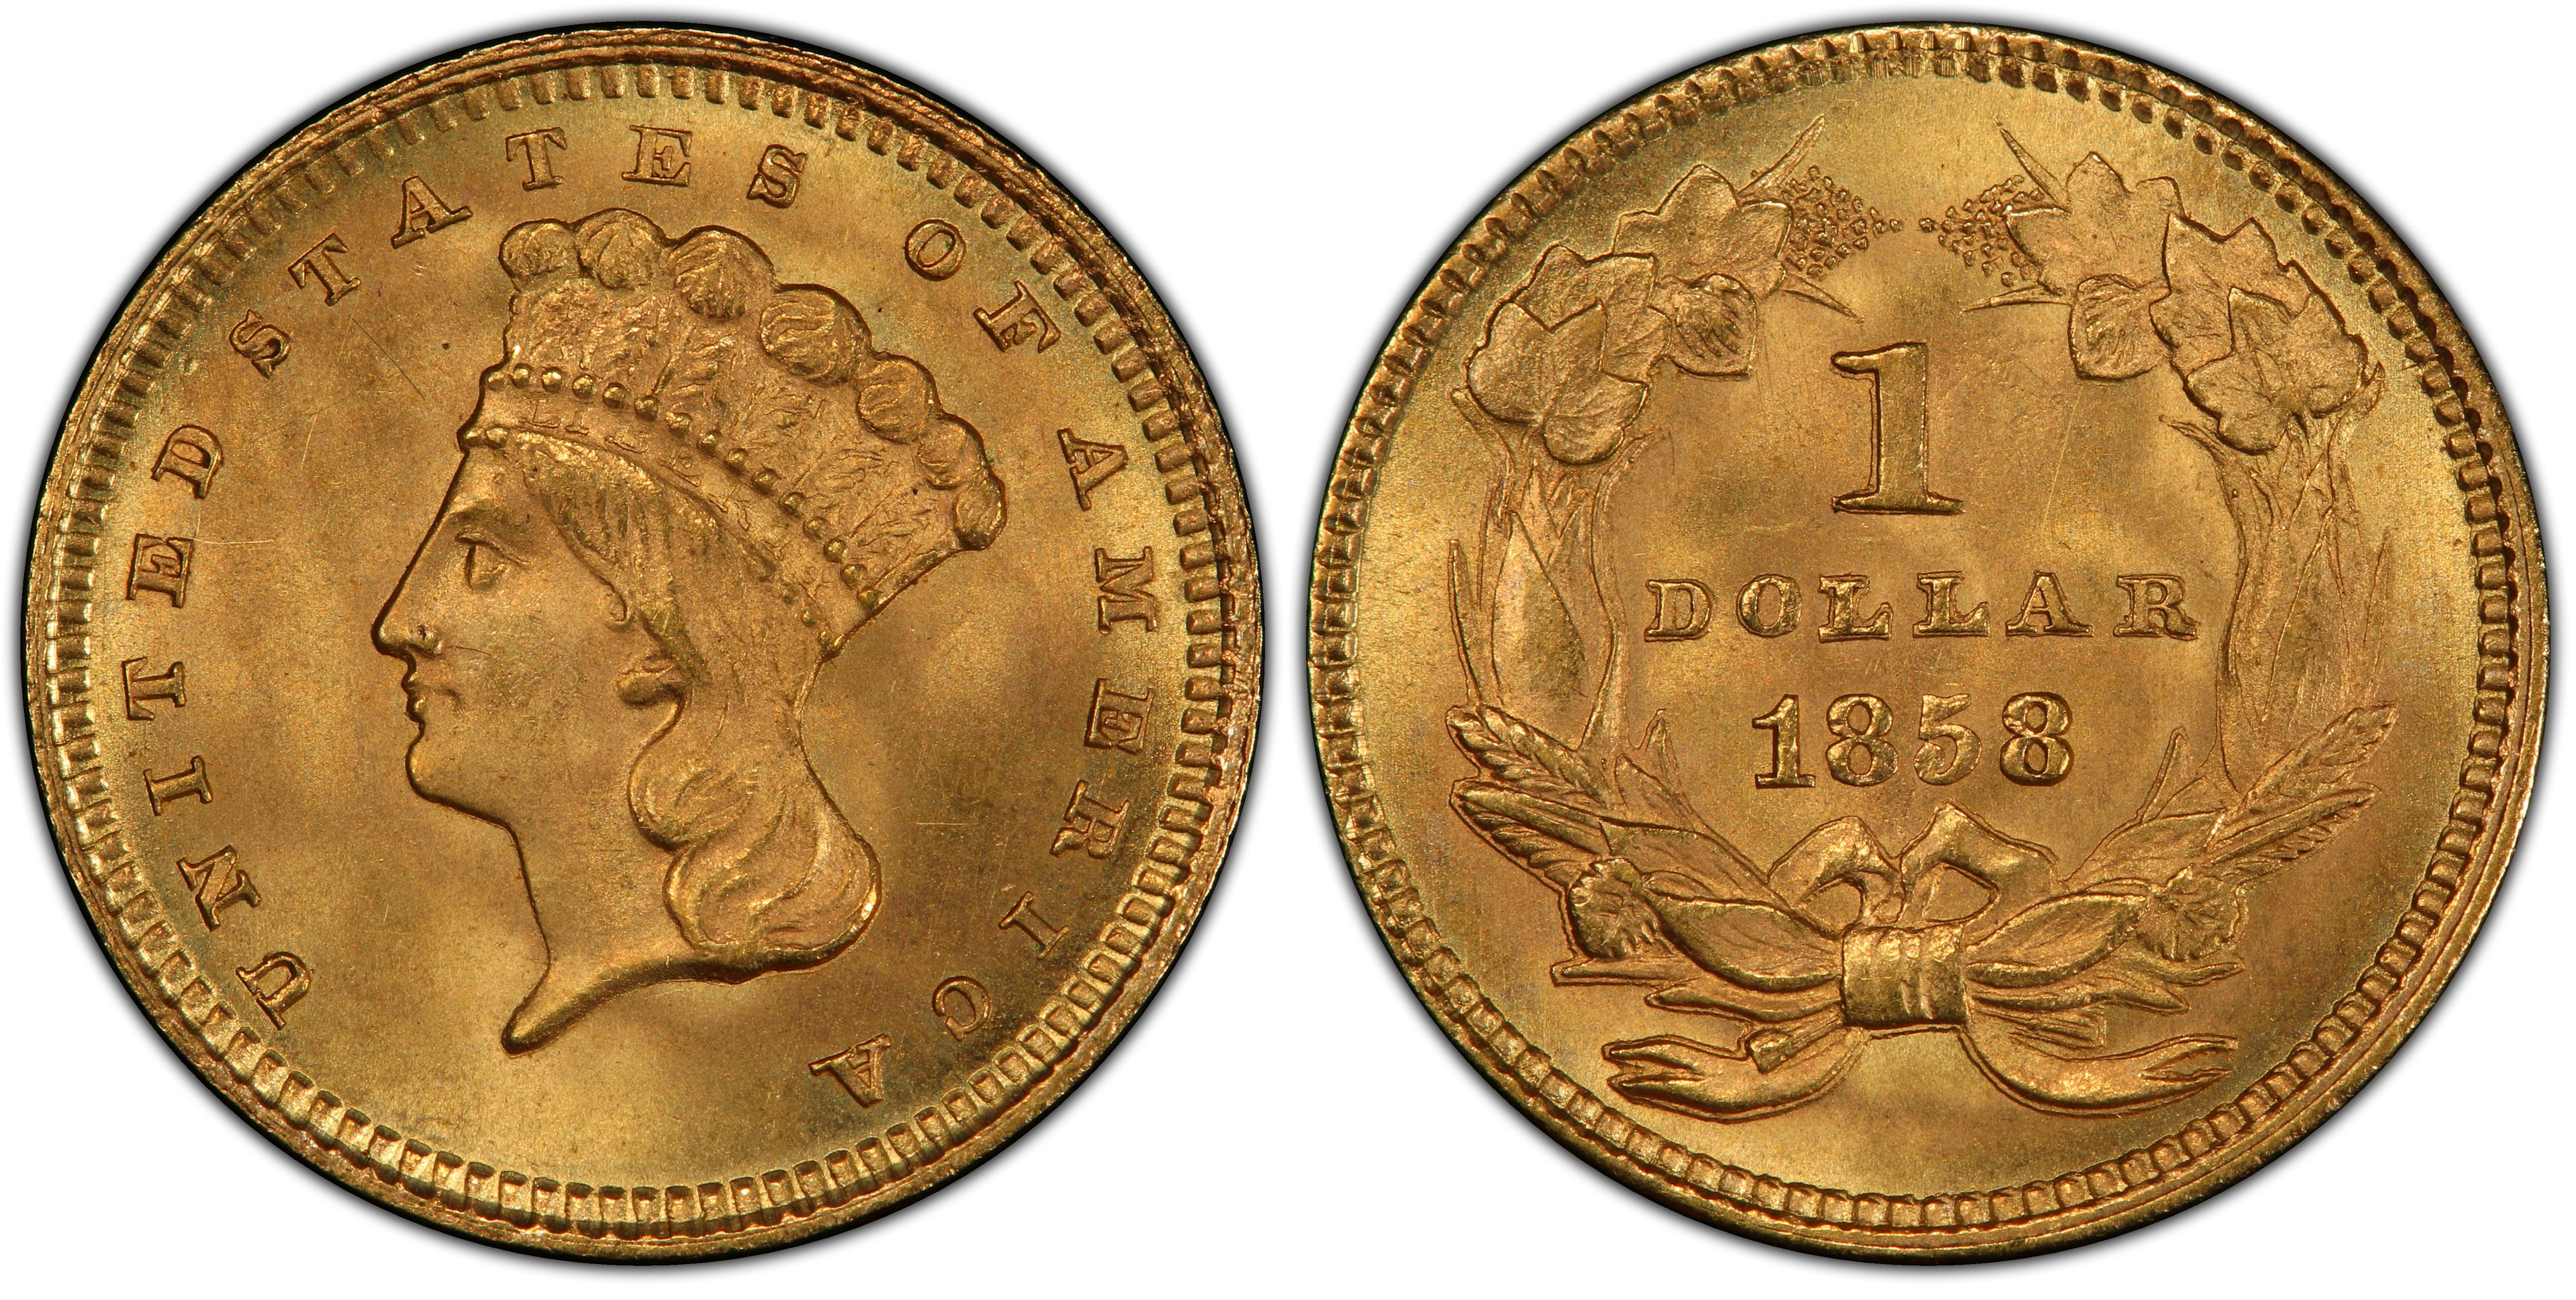 Images of Gold Dollar 1858 G$1 - PCGS CoinFacts